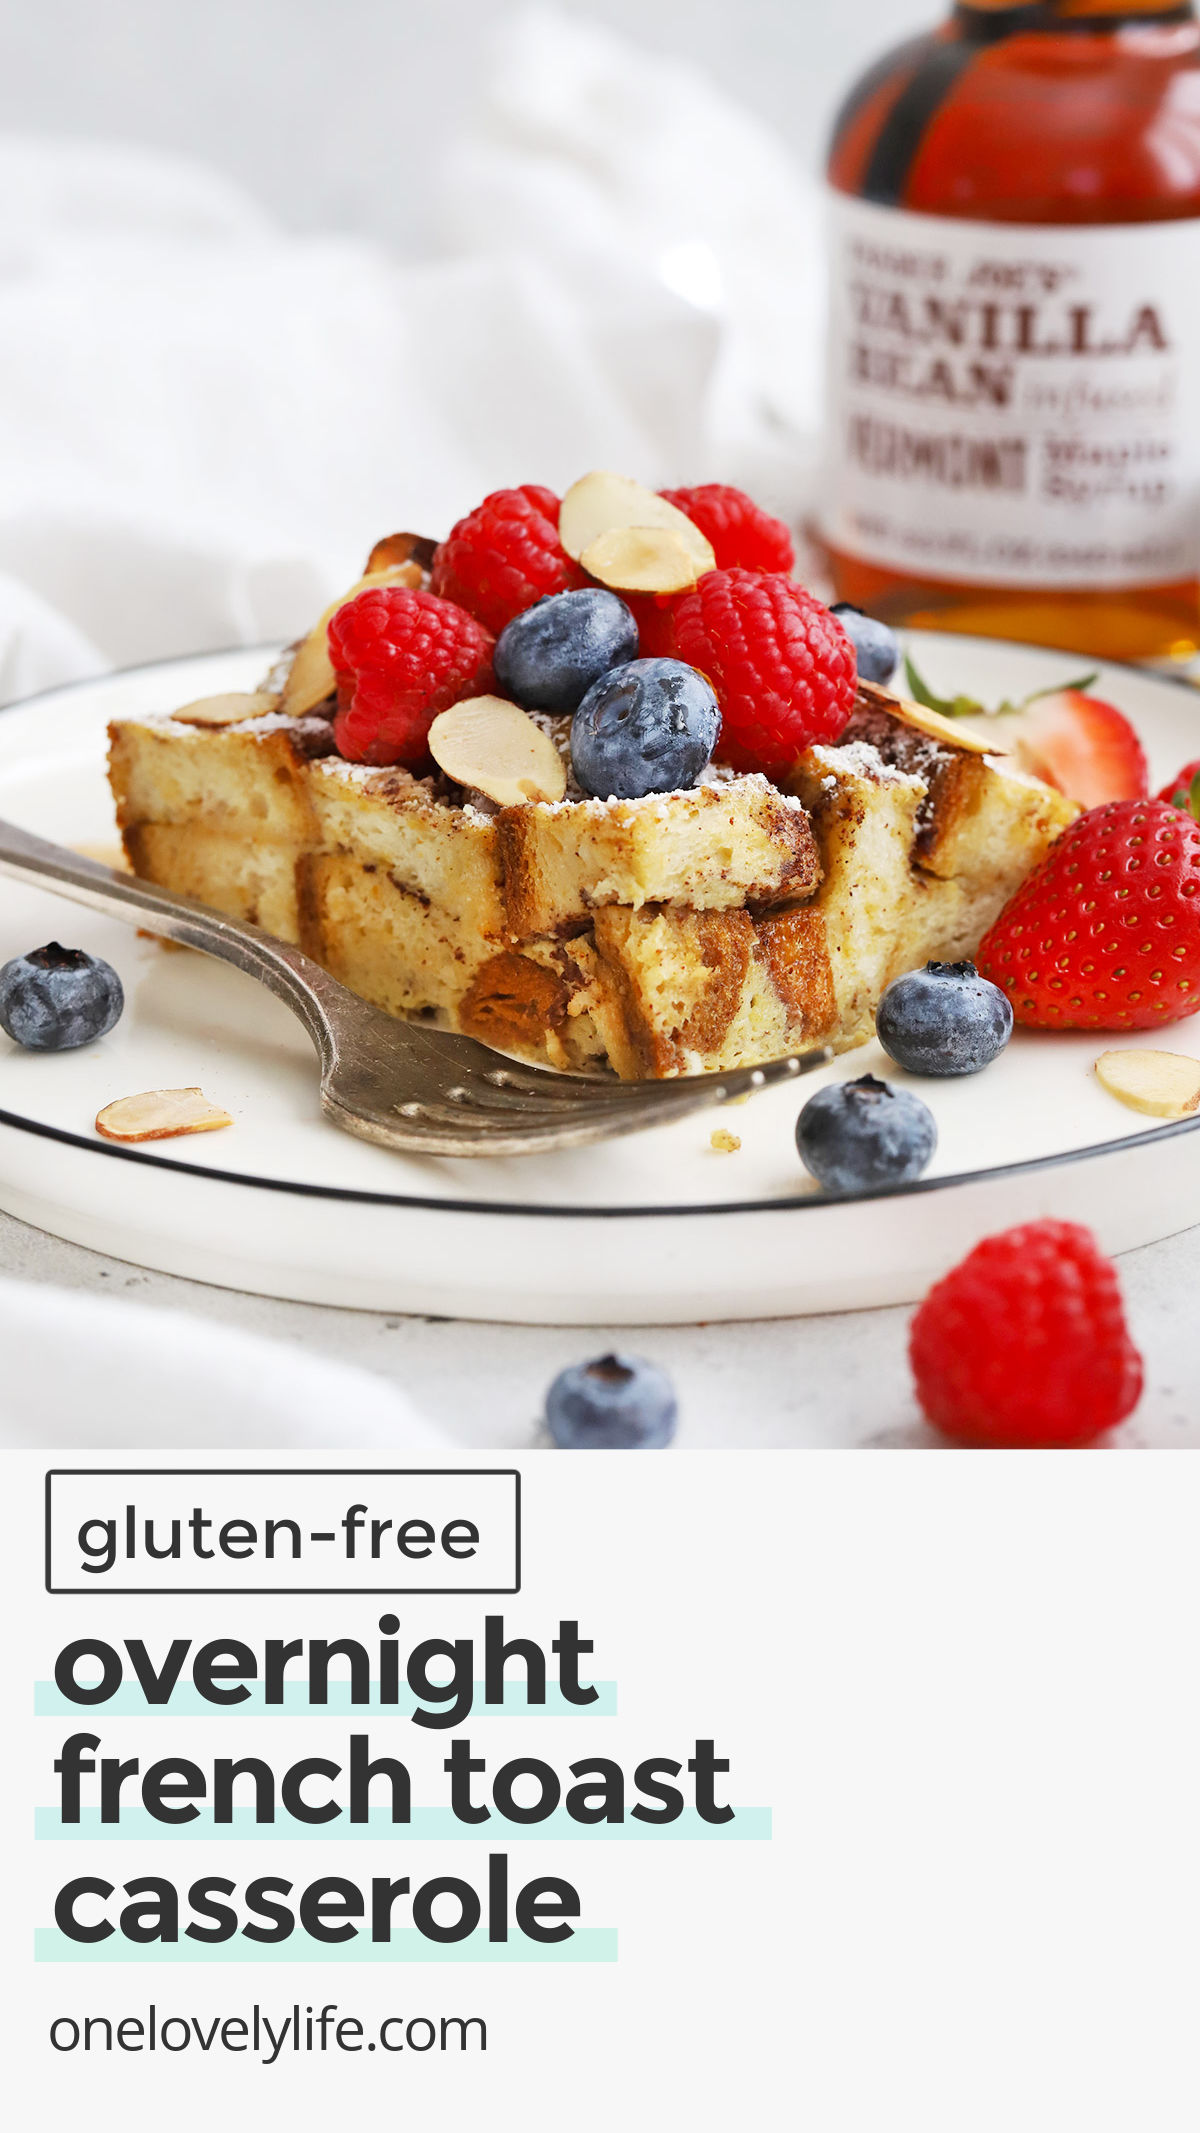 Gluten-Free French Toast Casserole - This easy overnight French toast casserole takes all the hassle out of French toast! Try our classic recipe or one of the tasty variations in the post for a fun treat! (Gluten-Free + Dairy-Free) // Gluten Free French Toast Bake // Gluten-Free Baked French Toast // Gluten-Free Overnight French Toast Casserole // Gluten Free Bread Pudding